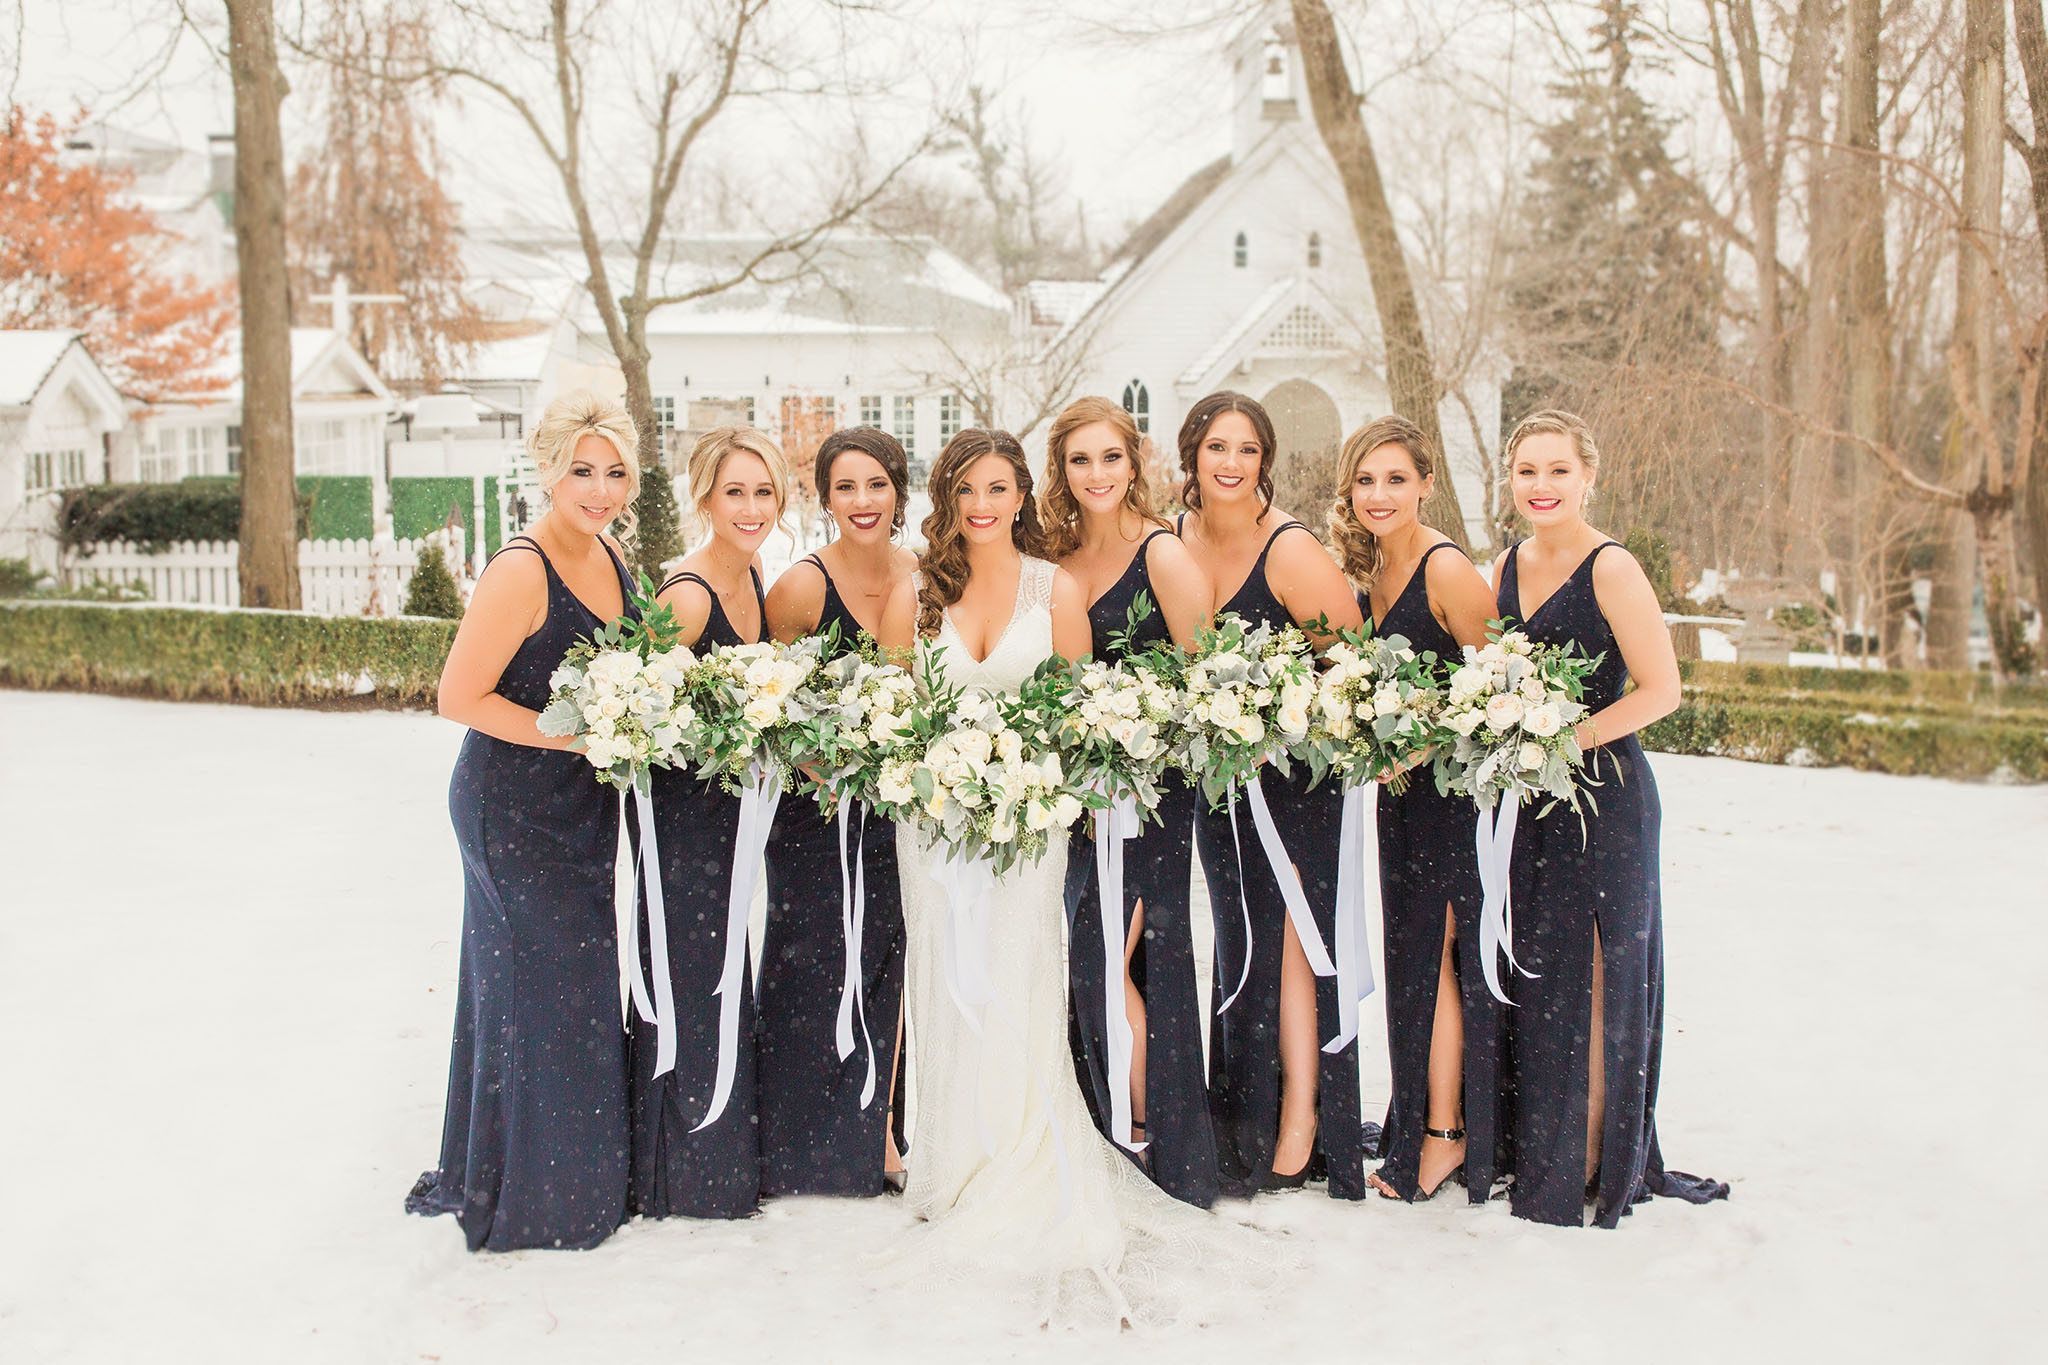 Eight beautiful ladies all outside with snow all around. Standing in front of heritage house with green hedges and gorgeous white floral bouquets.